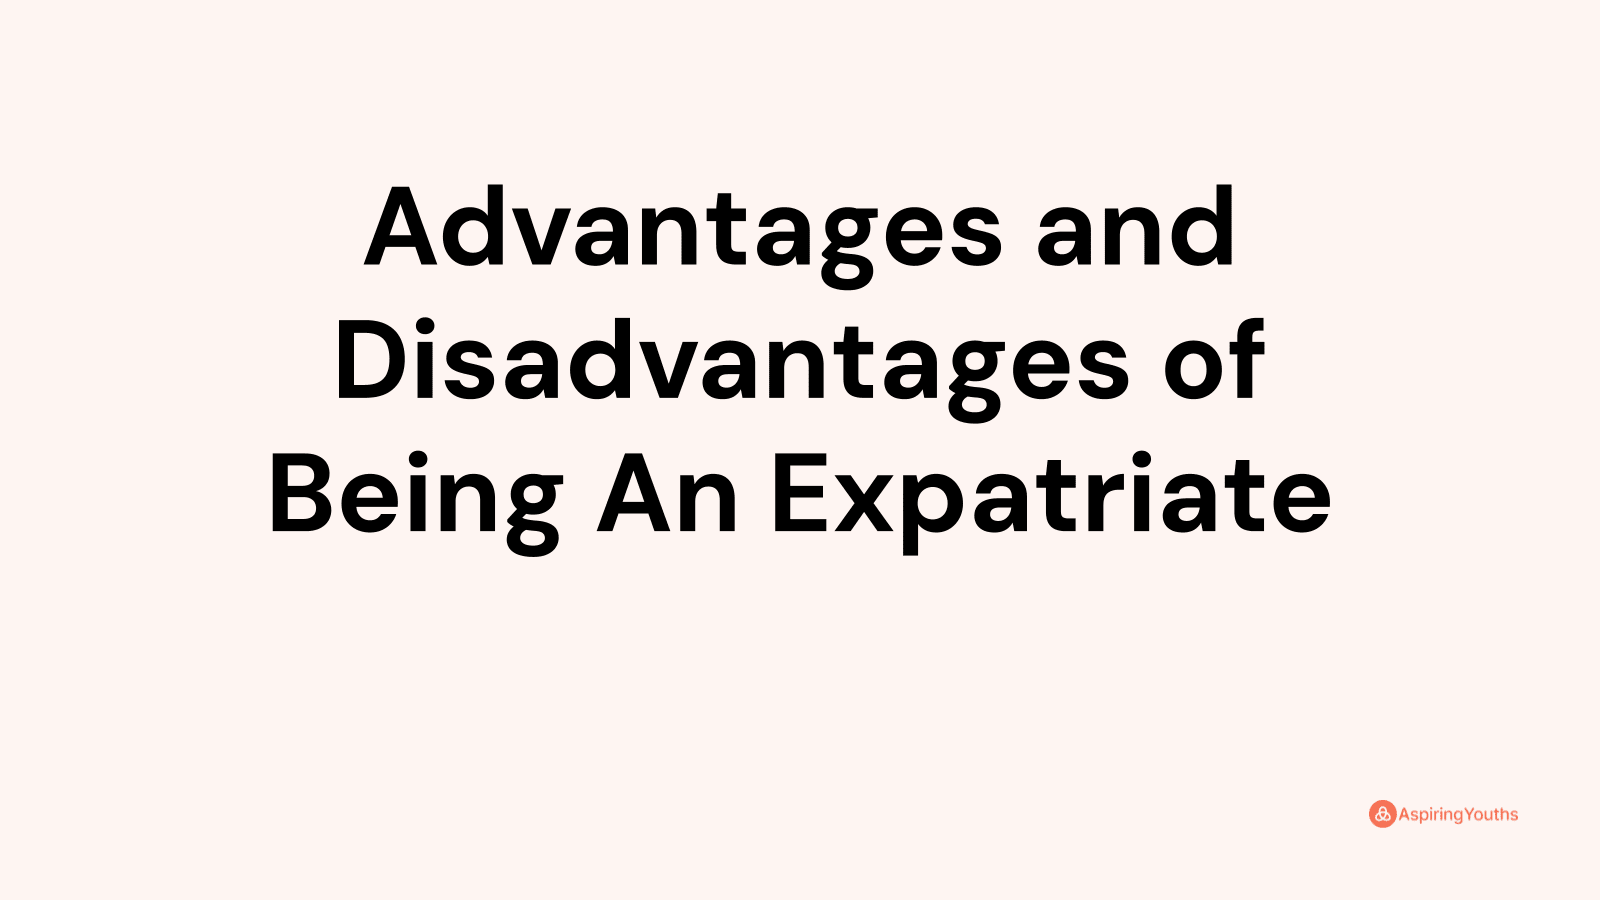 Advantages and disadvantages of Being An Expatriate